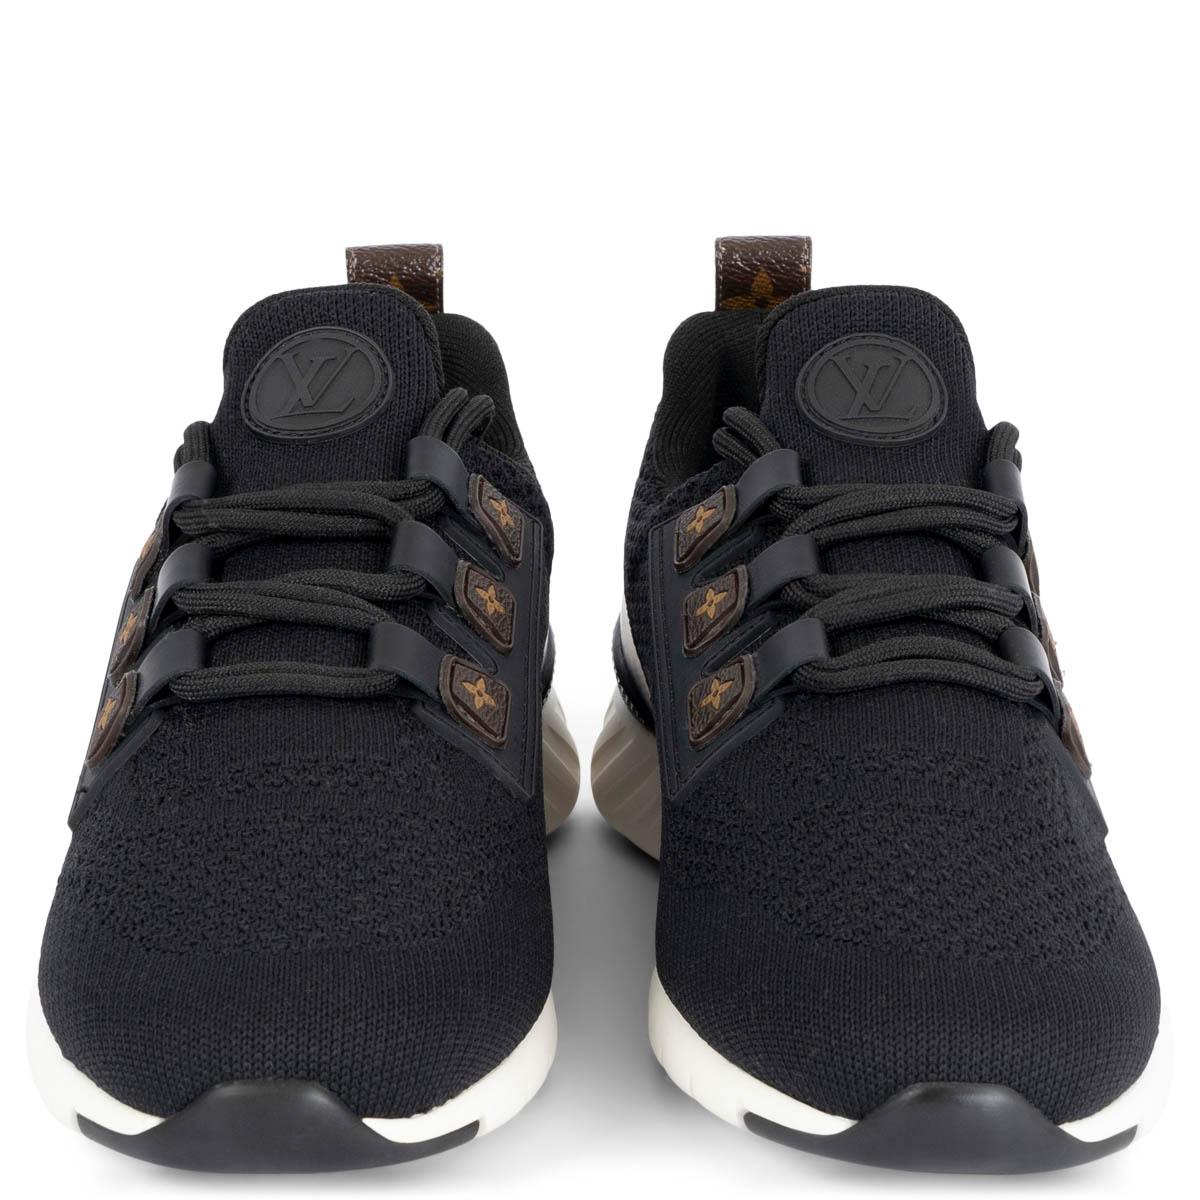 100% authentic Louis Vuitton Aftergame sneakers in black mesh embellished with signature details: a back loop in brown monogram canvas and brown rubber monogram flower inserts for the laces. The white outsole is embossed with the emblematic